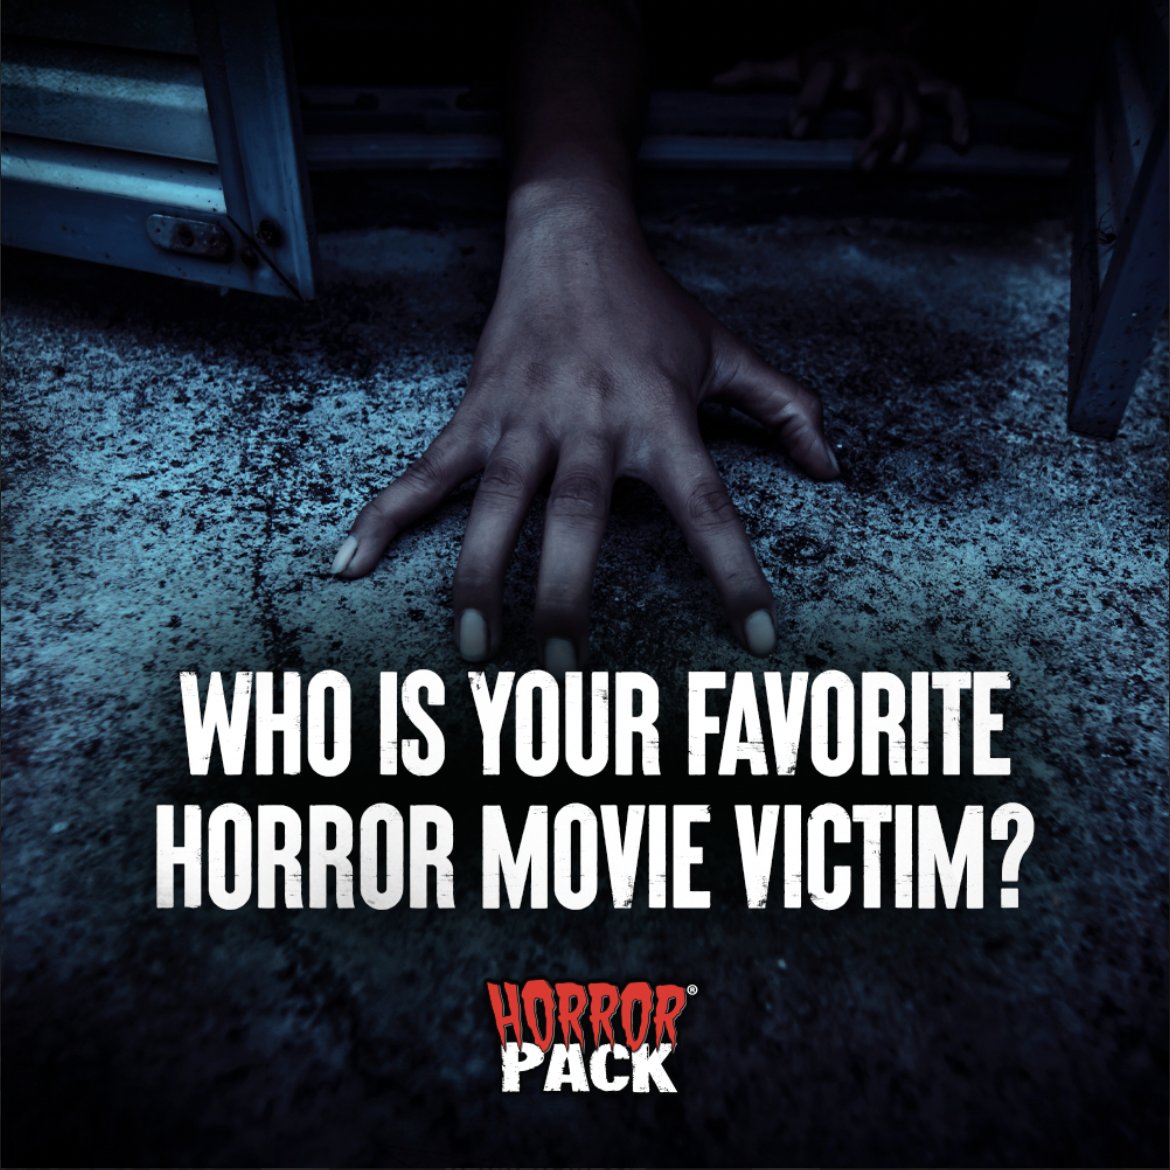 Who is your favorite horror movie victim?